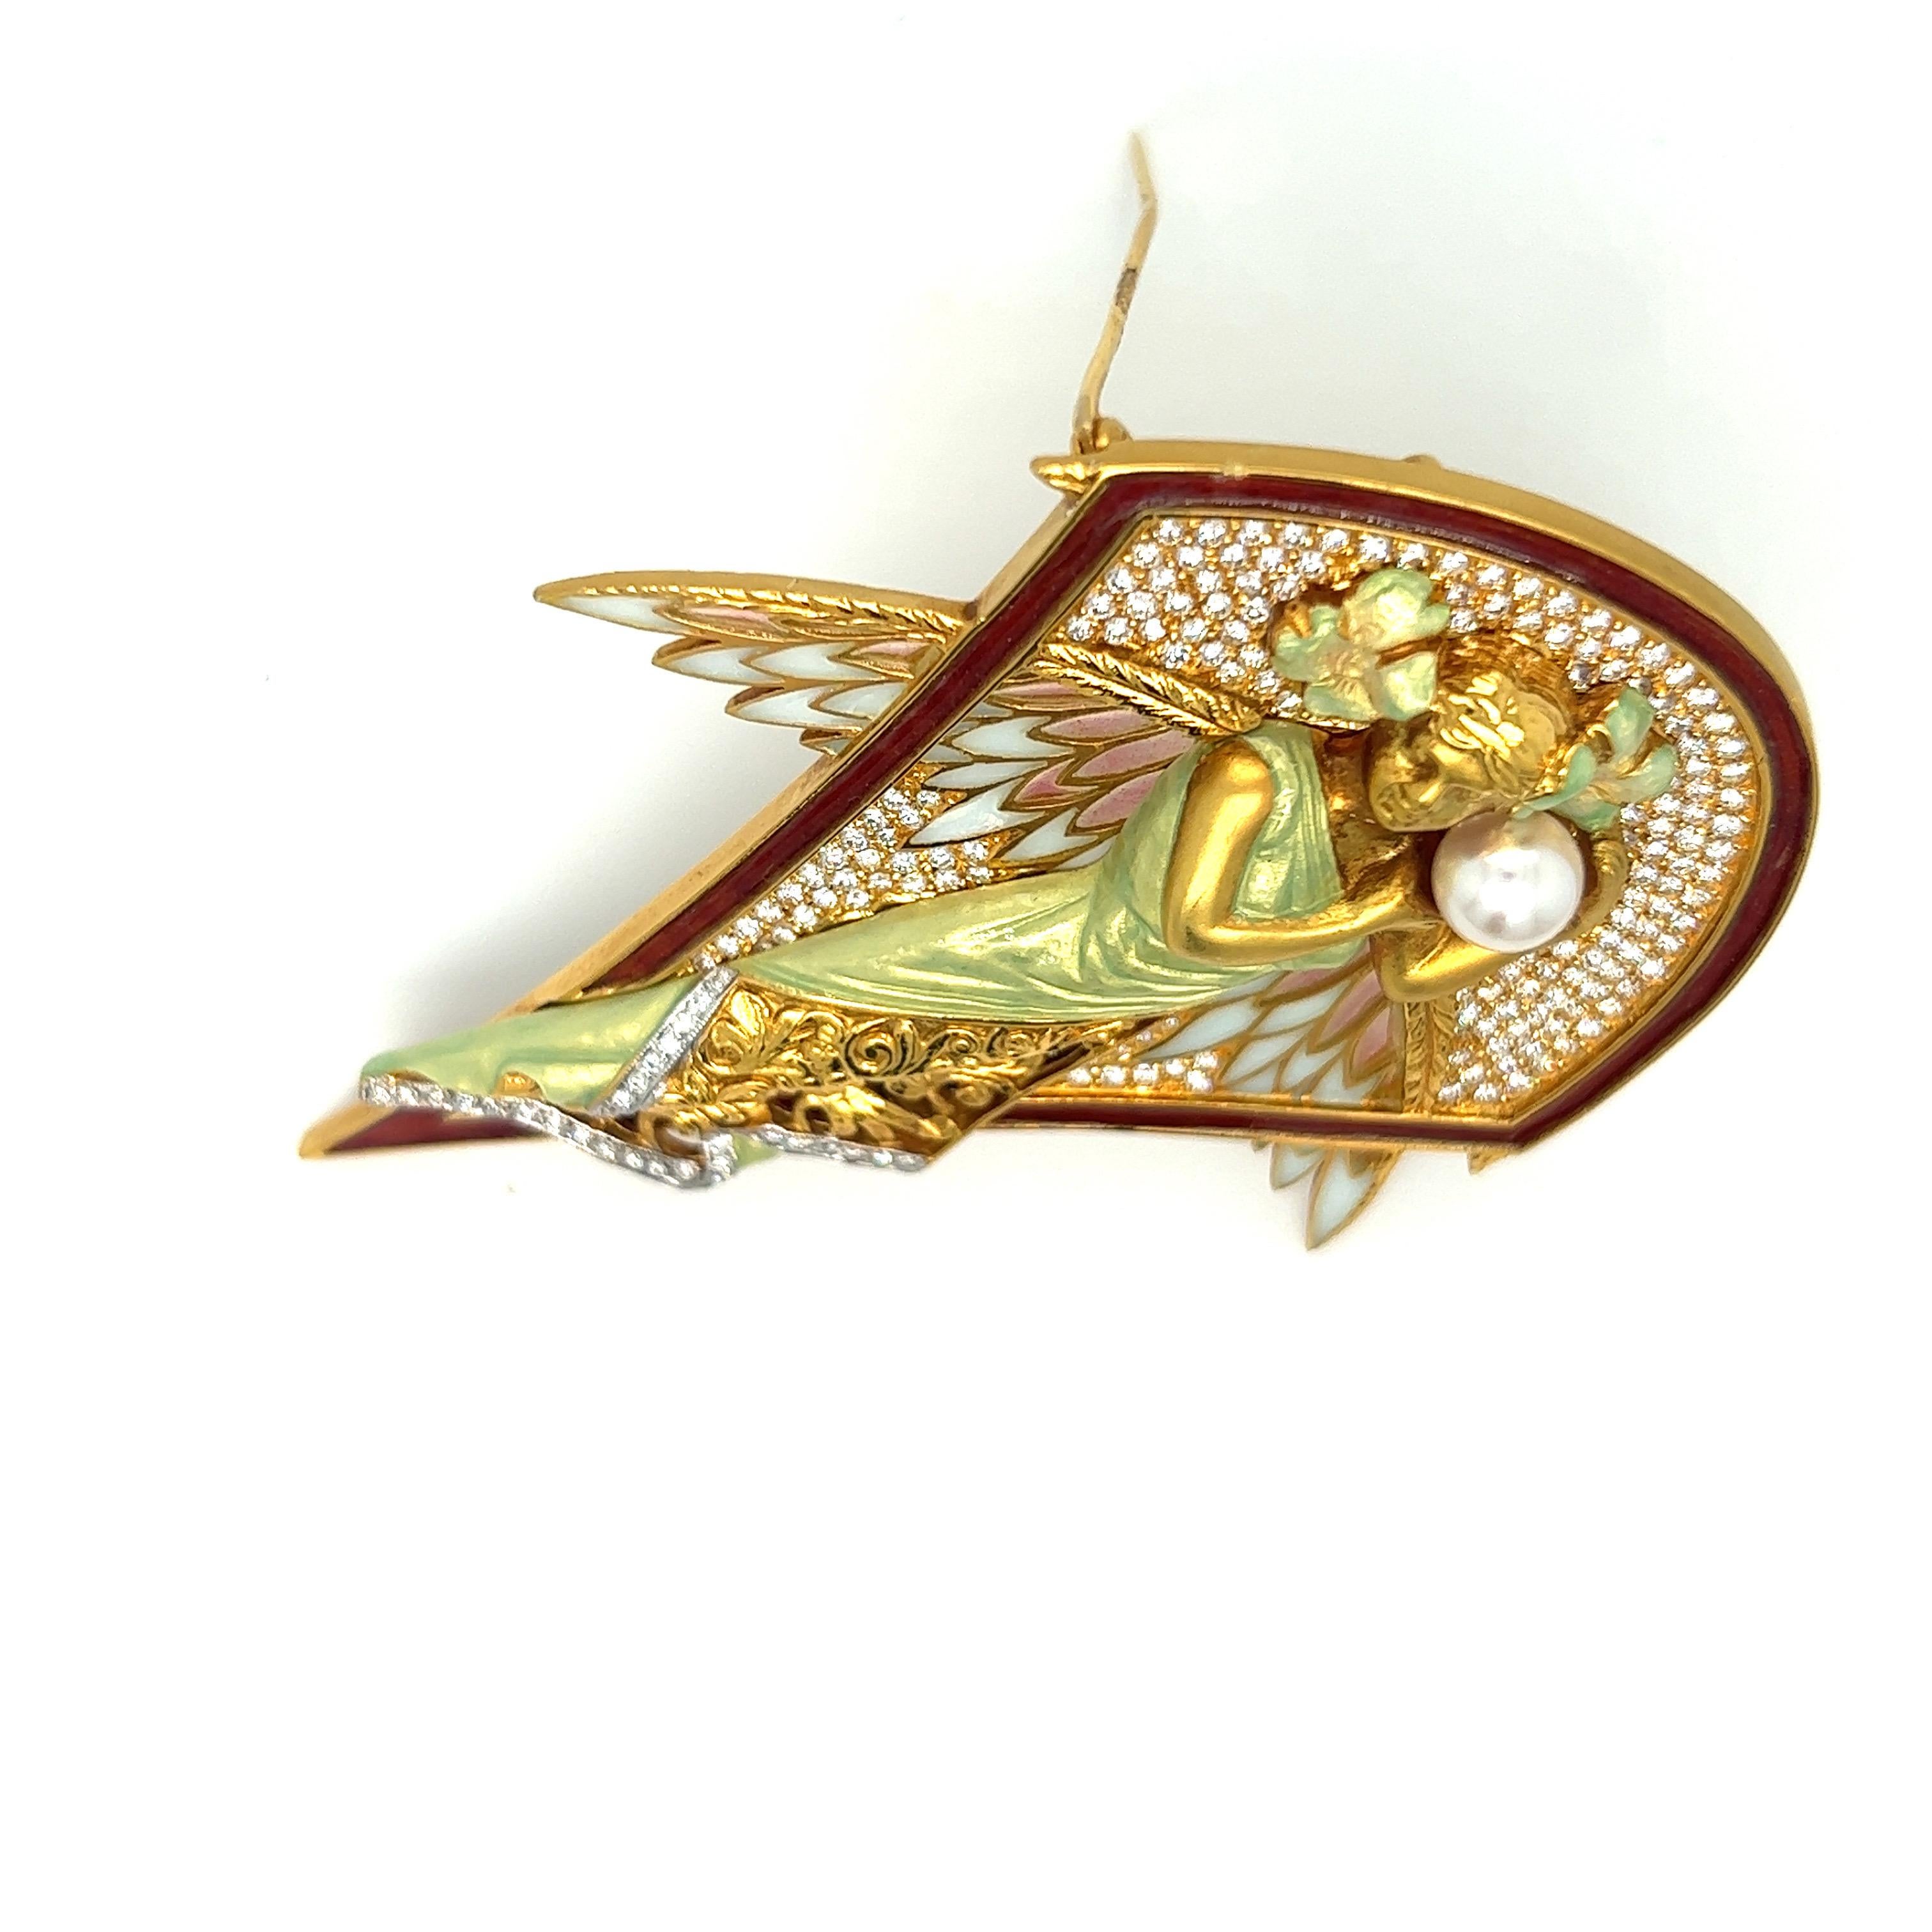 Masriera 18 KT YG Winged Nymph Brooch with Dia 1.94CT, Enamel and Pearls For Sale 1